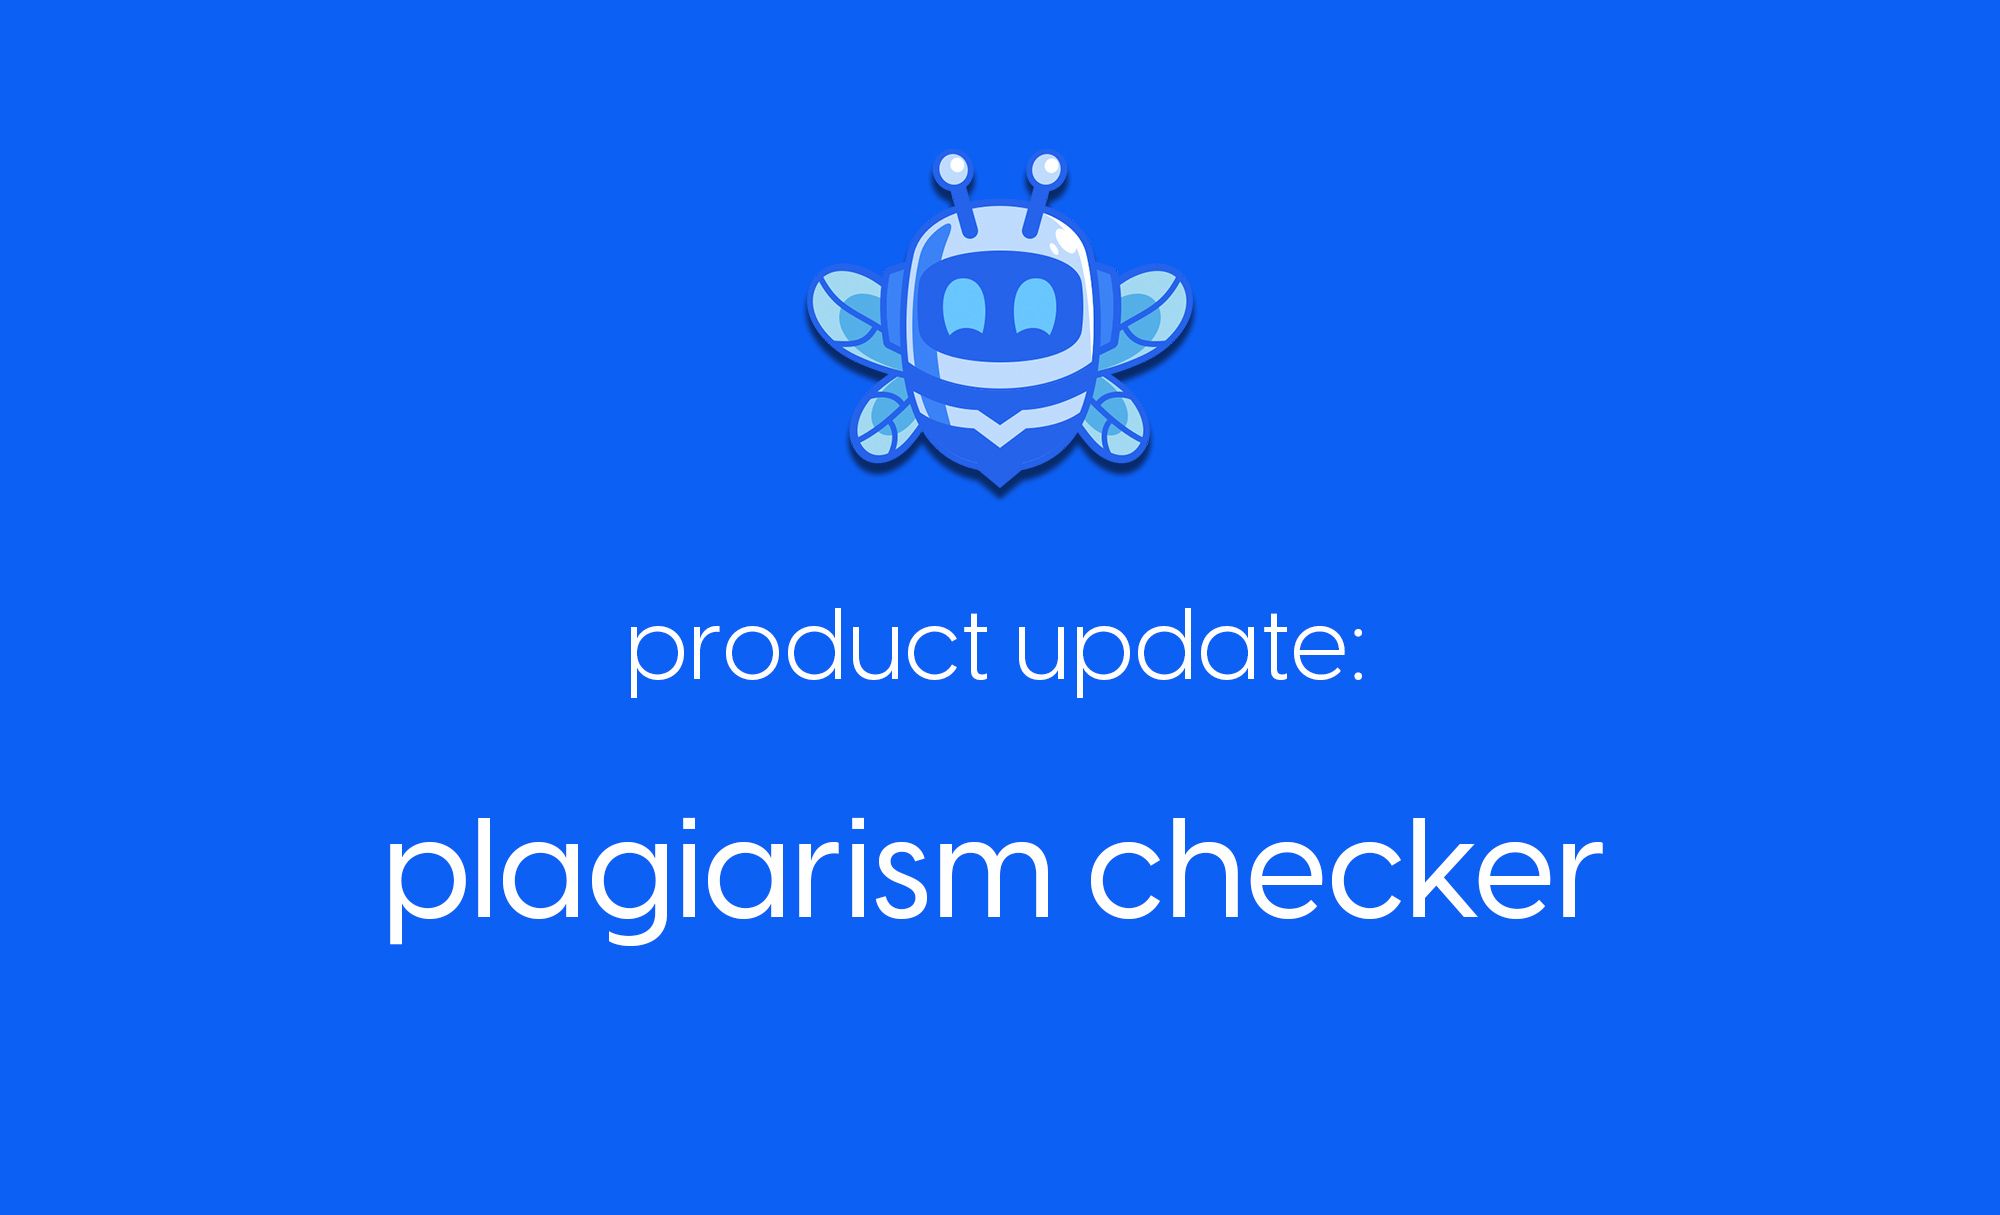 online assignment plagiarism checker project using machine learning